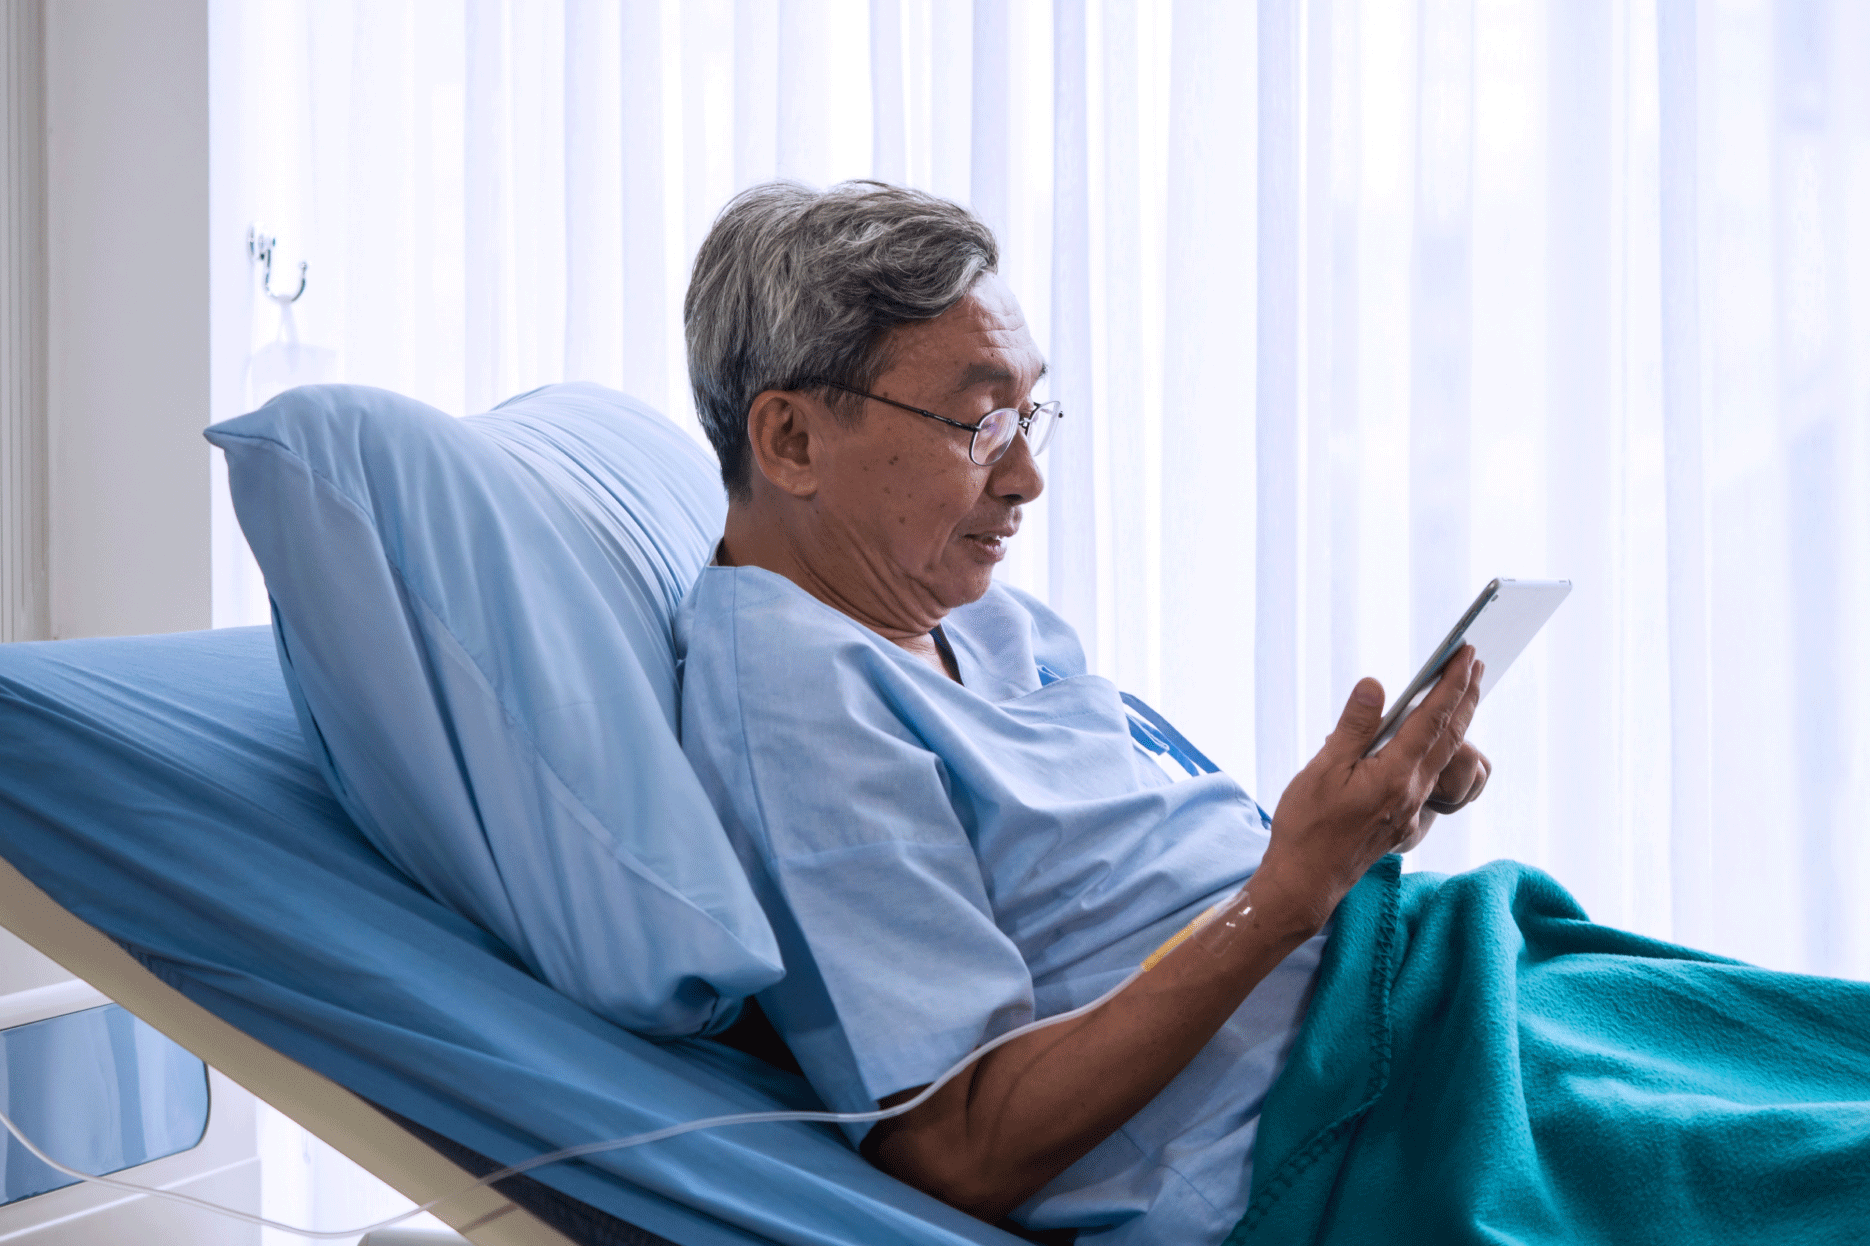 Male patient sitting up in hospital bed using a tablet device.